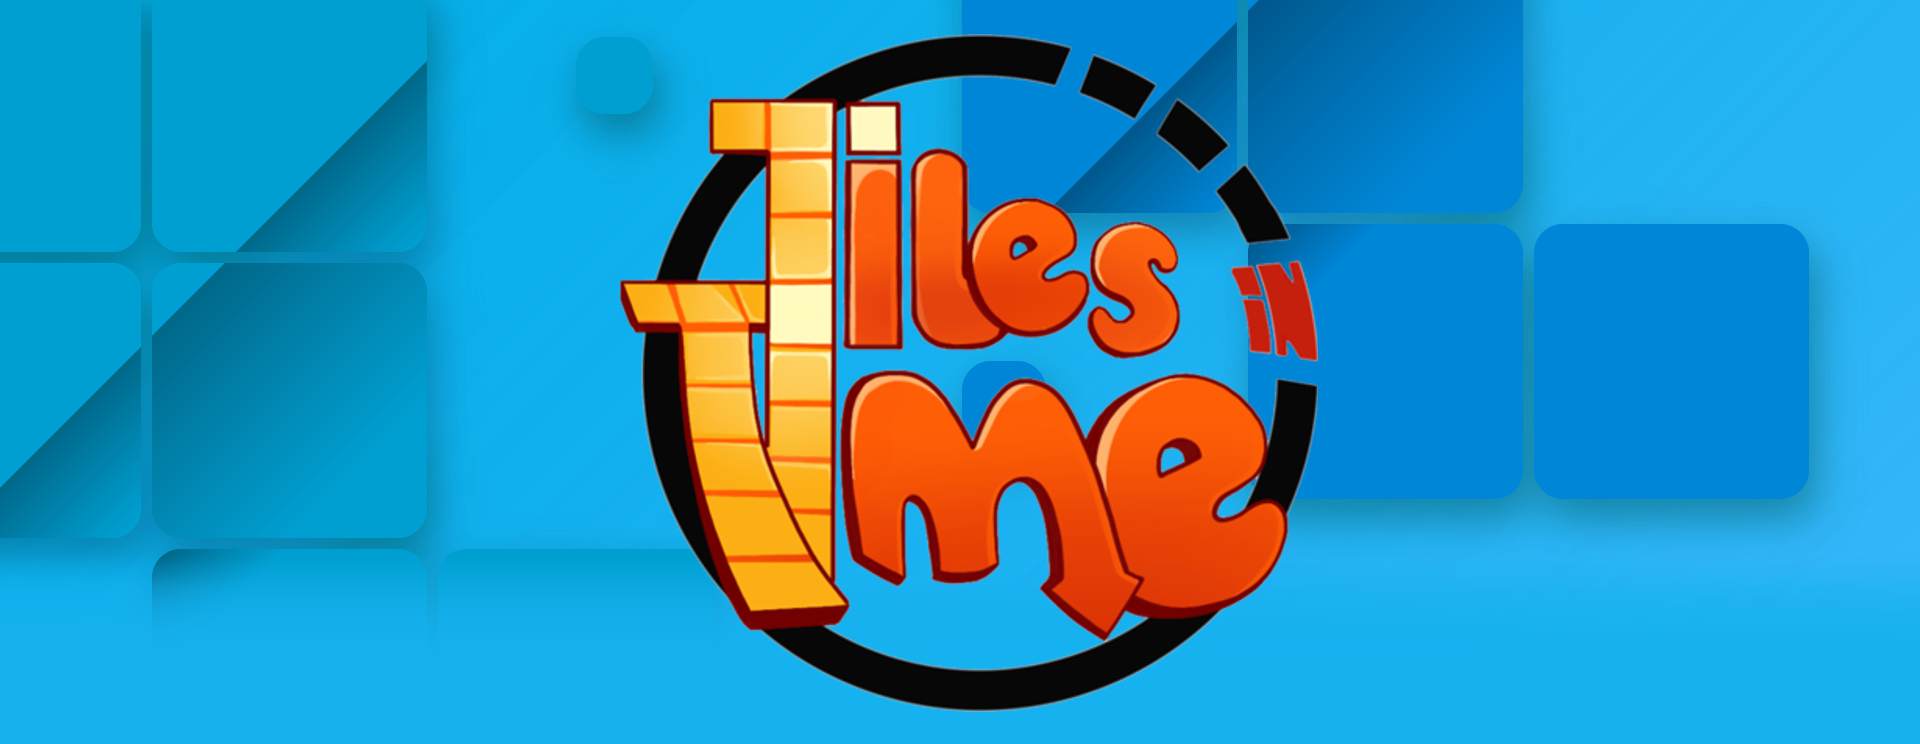 Tiles In Time